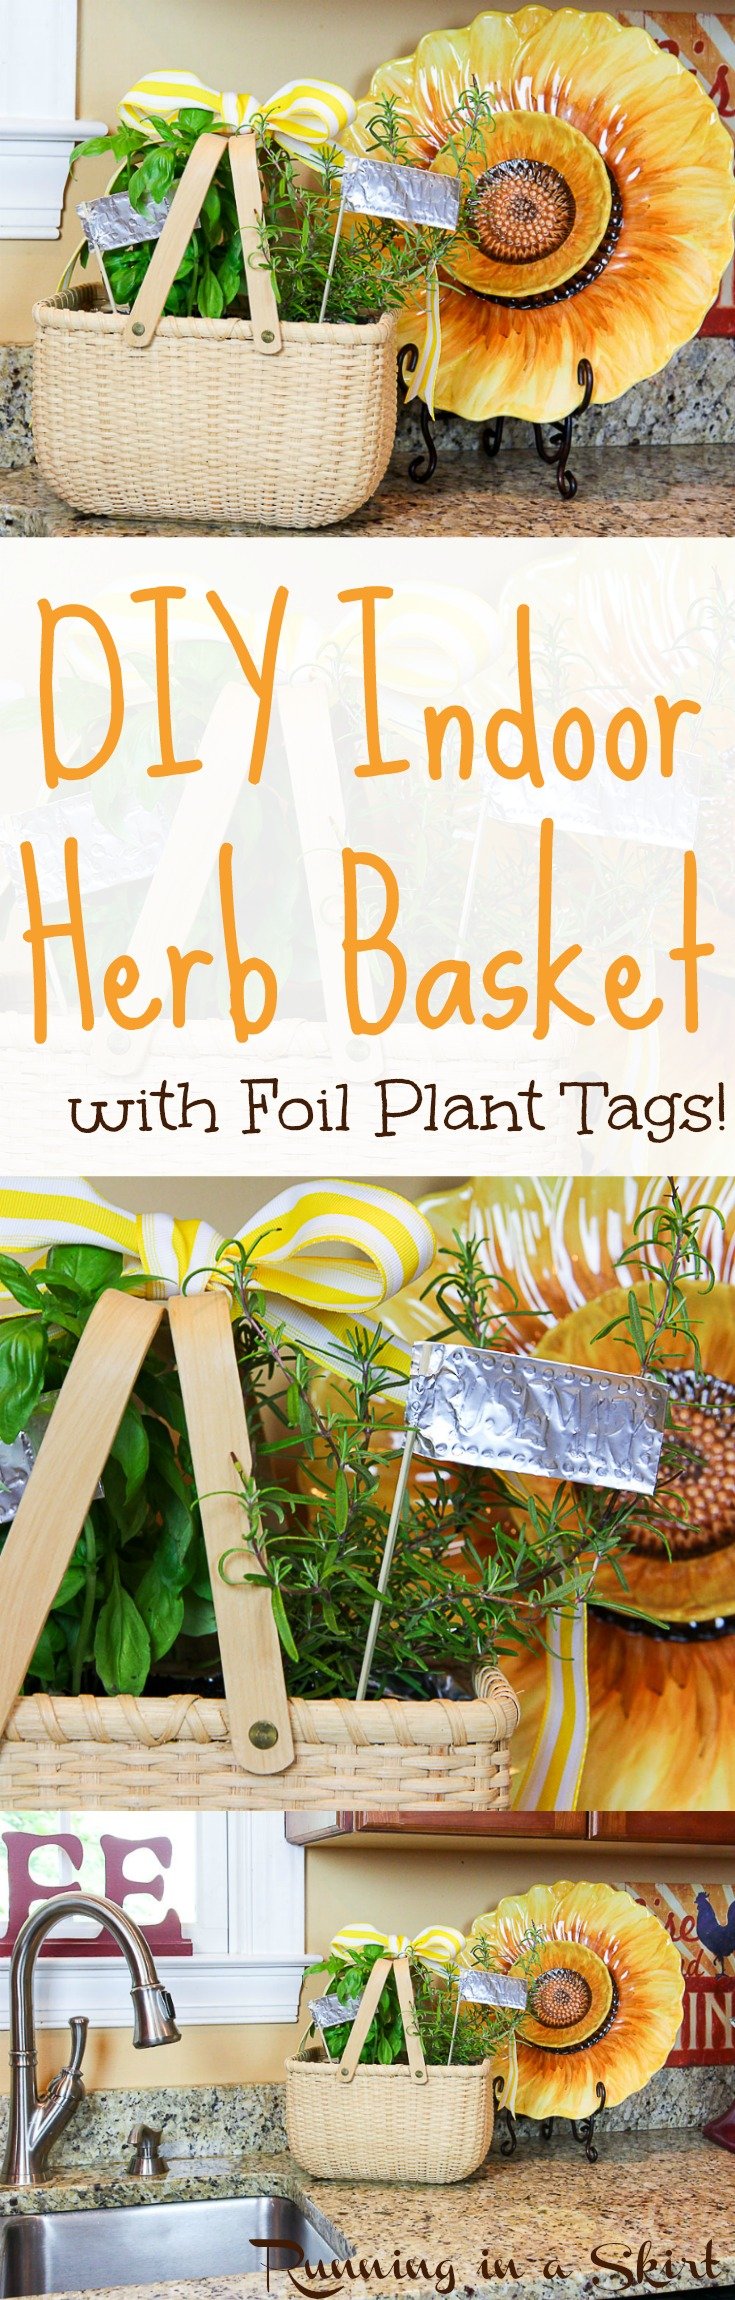 How to make an Indoor Herb Garden with foil plant tags